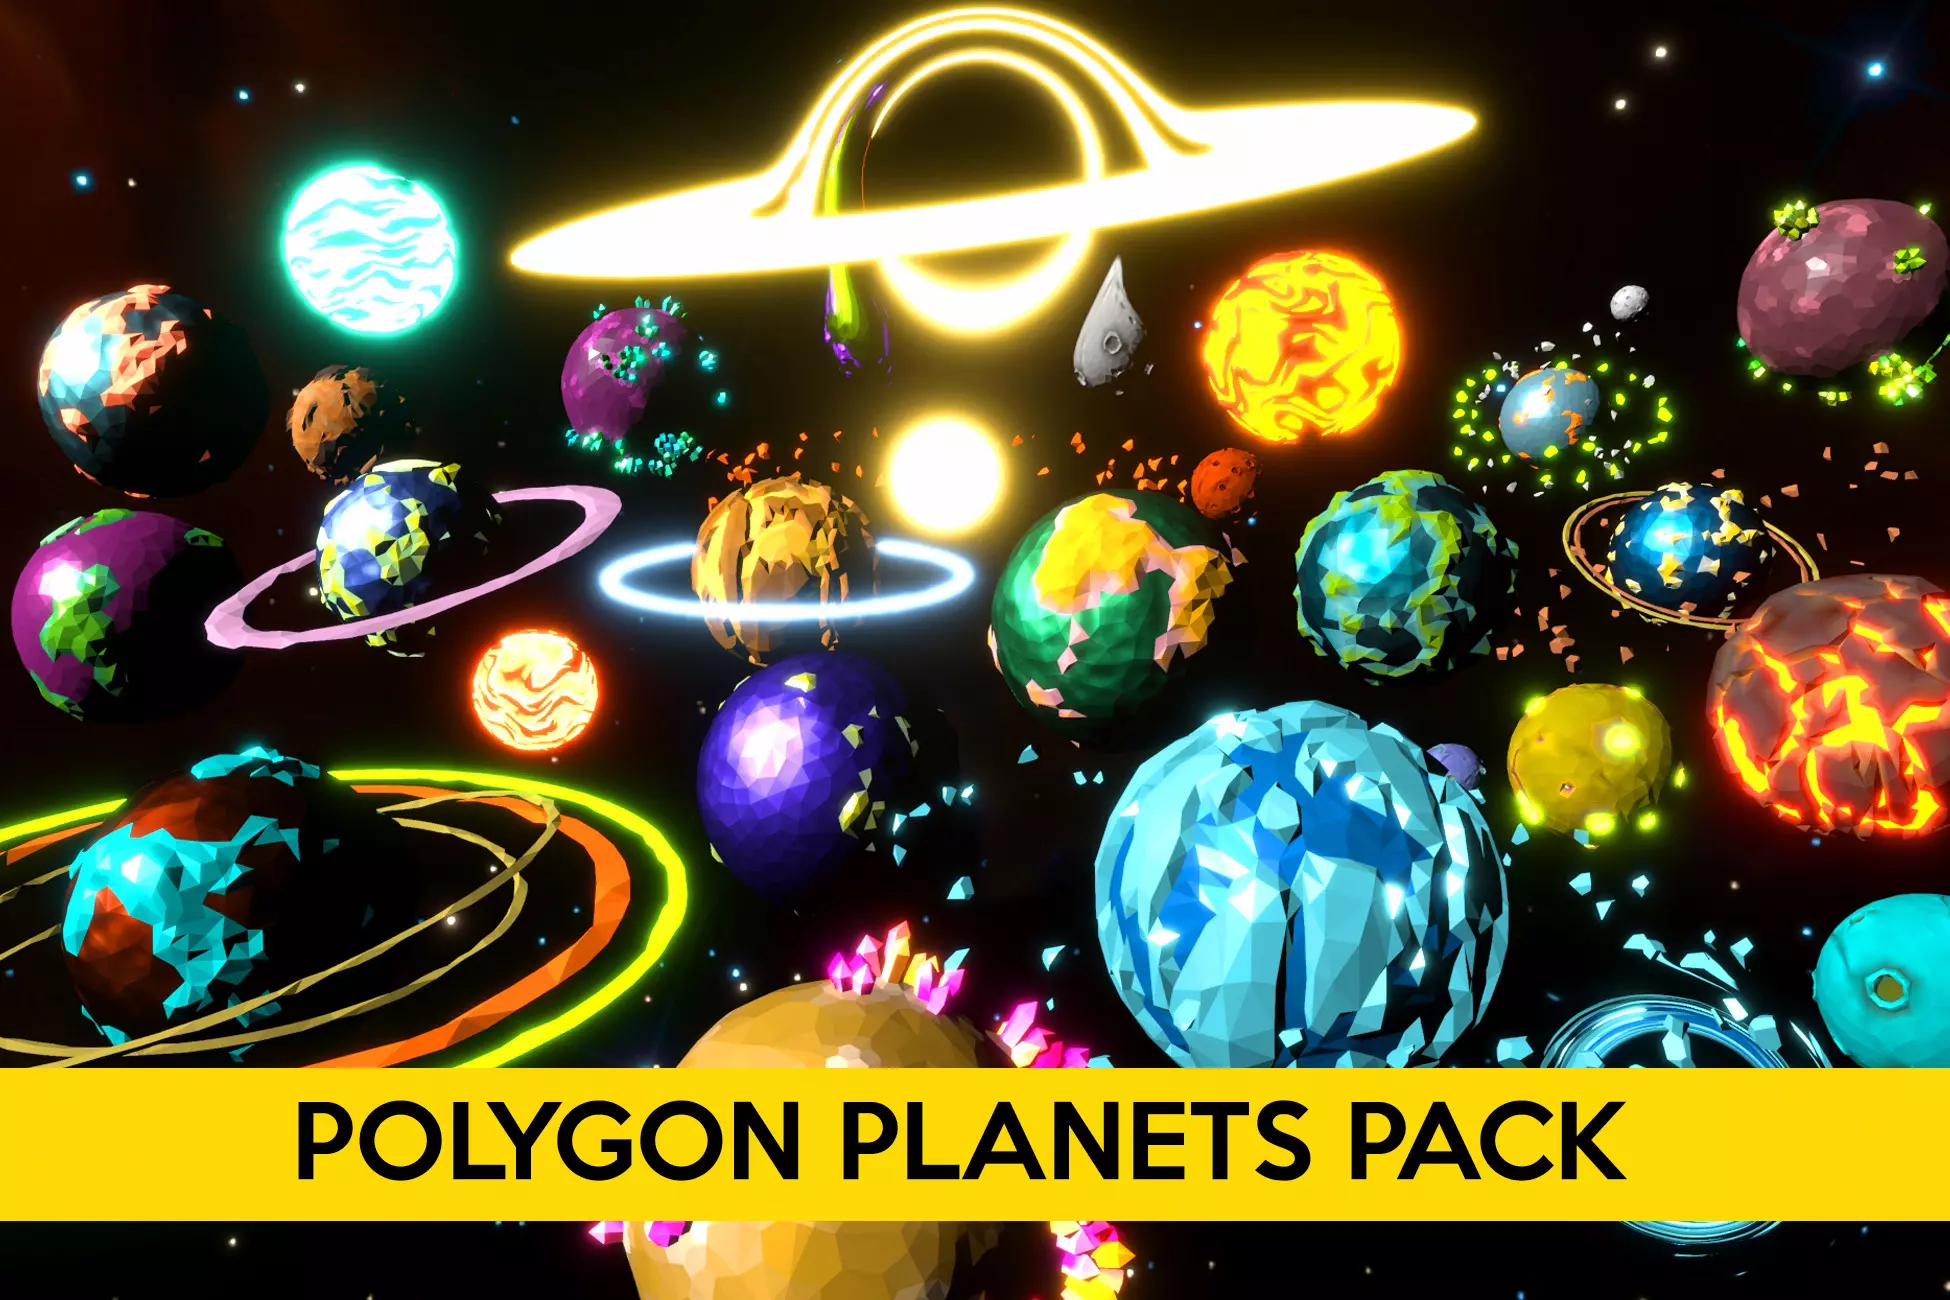 Unity Asset Polygon Planets Pack free download